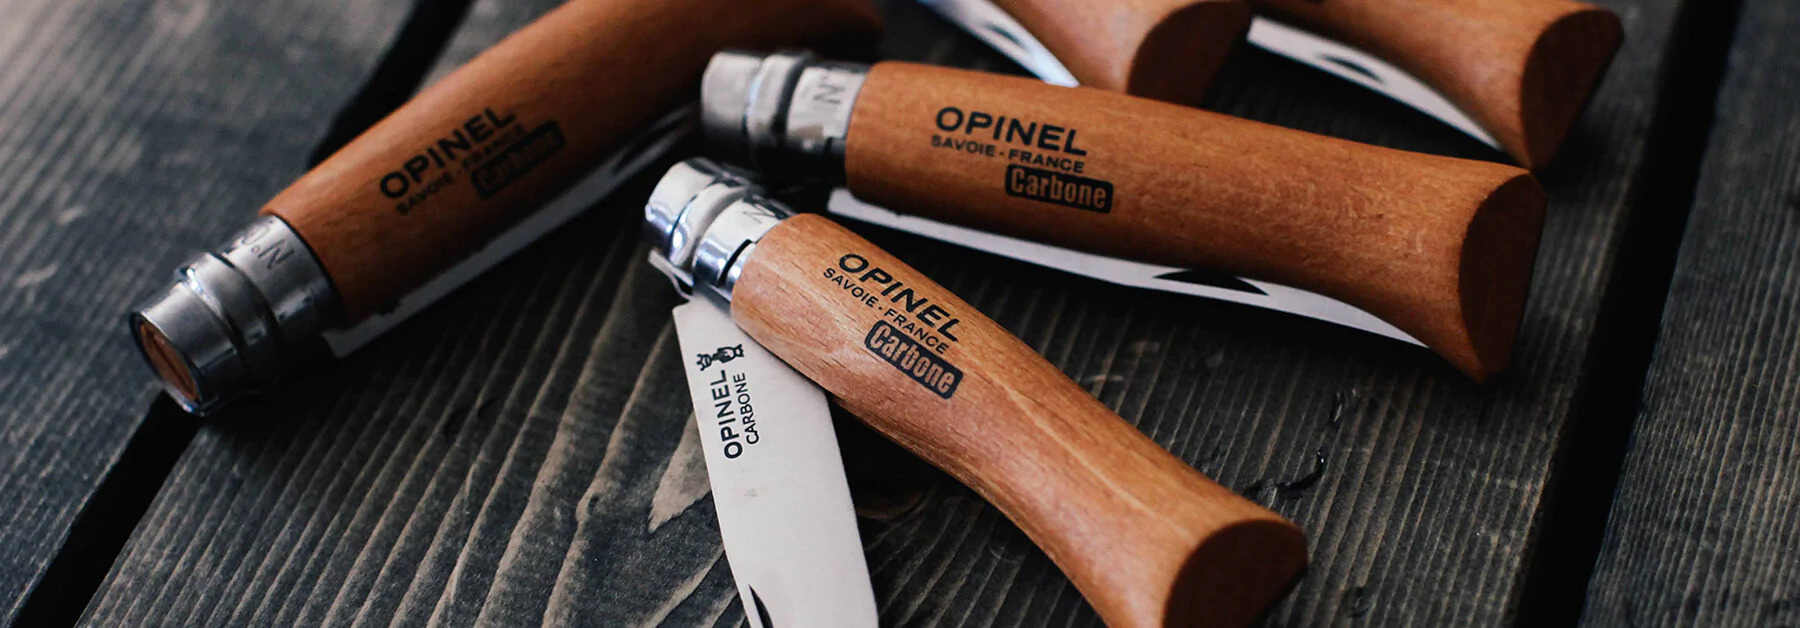 Opinel folding knives carbon